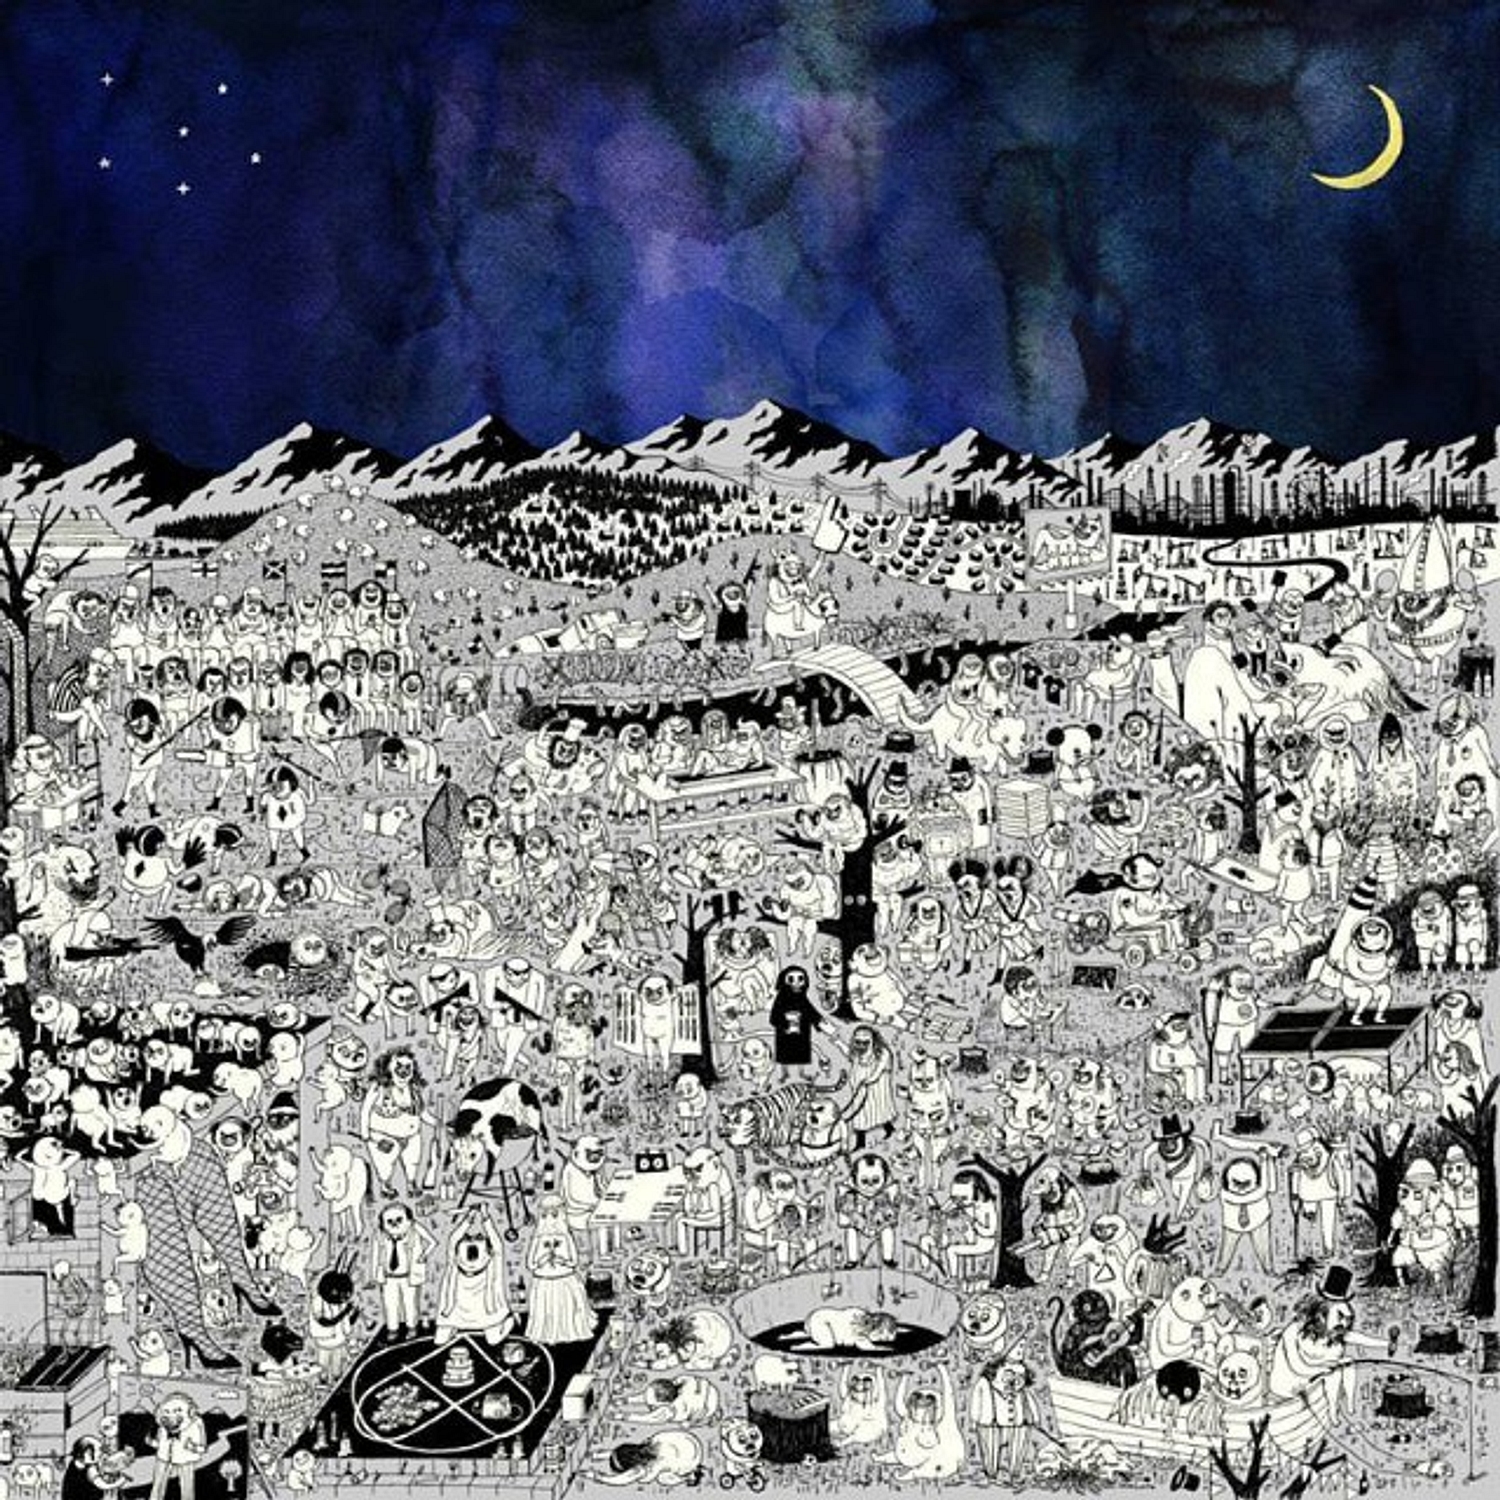 Father John Misty unveils new track 'Pure Comedy'